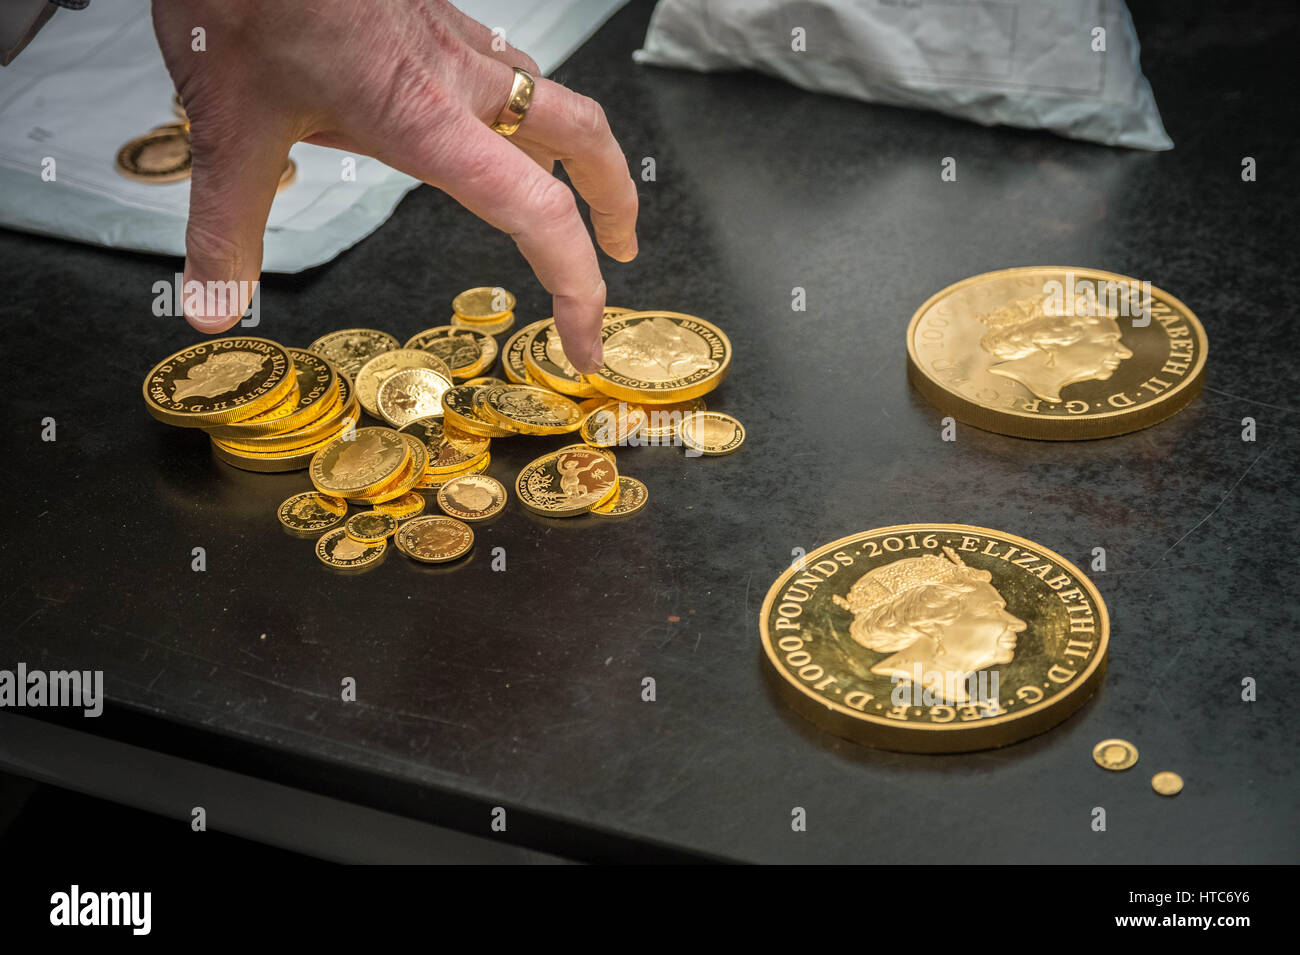 As well as standard coins, the London Assay office also tests commemorative coins. Pictured here a mix of pure gold 999 proof sovereign coins. Stock Photo